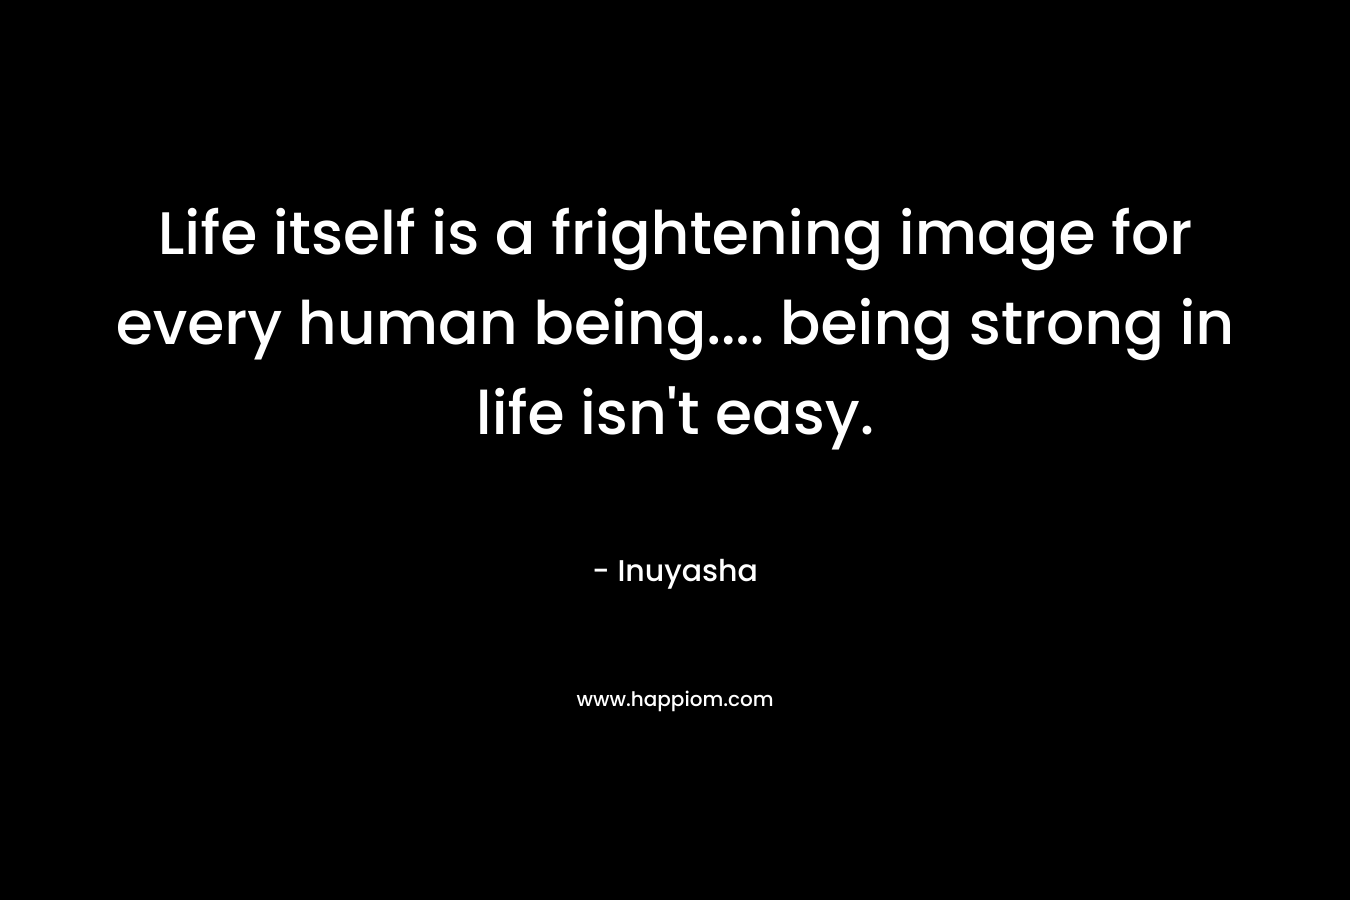 Life itself is a frightening image for every human being.... being strong in life isn't easy.